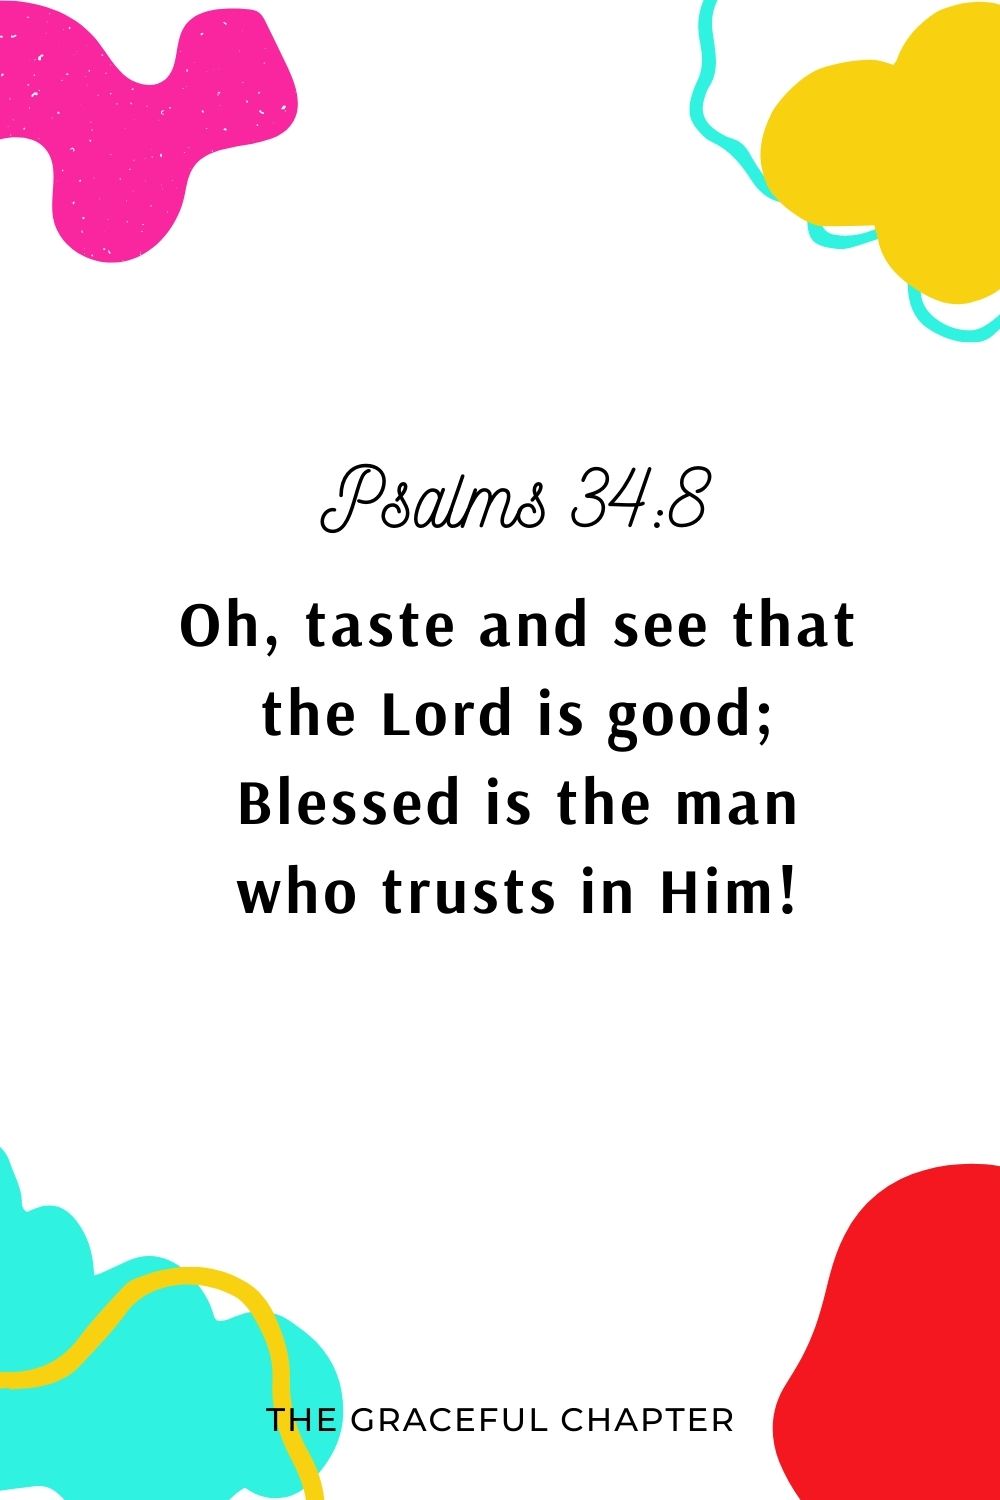 Oh, taste and see that the Lord is good; Blessed is the man who trusts in Him! Psalms 34:8